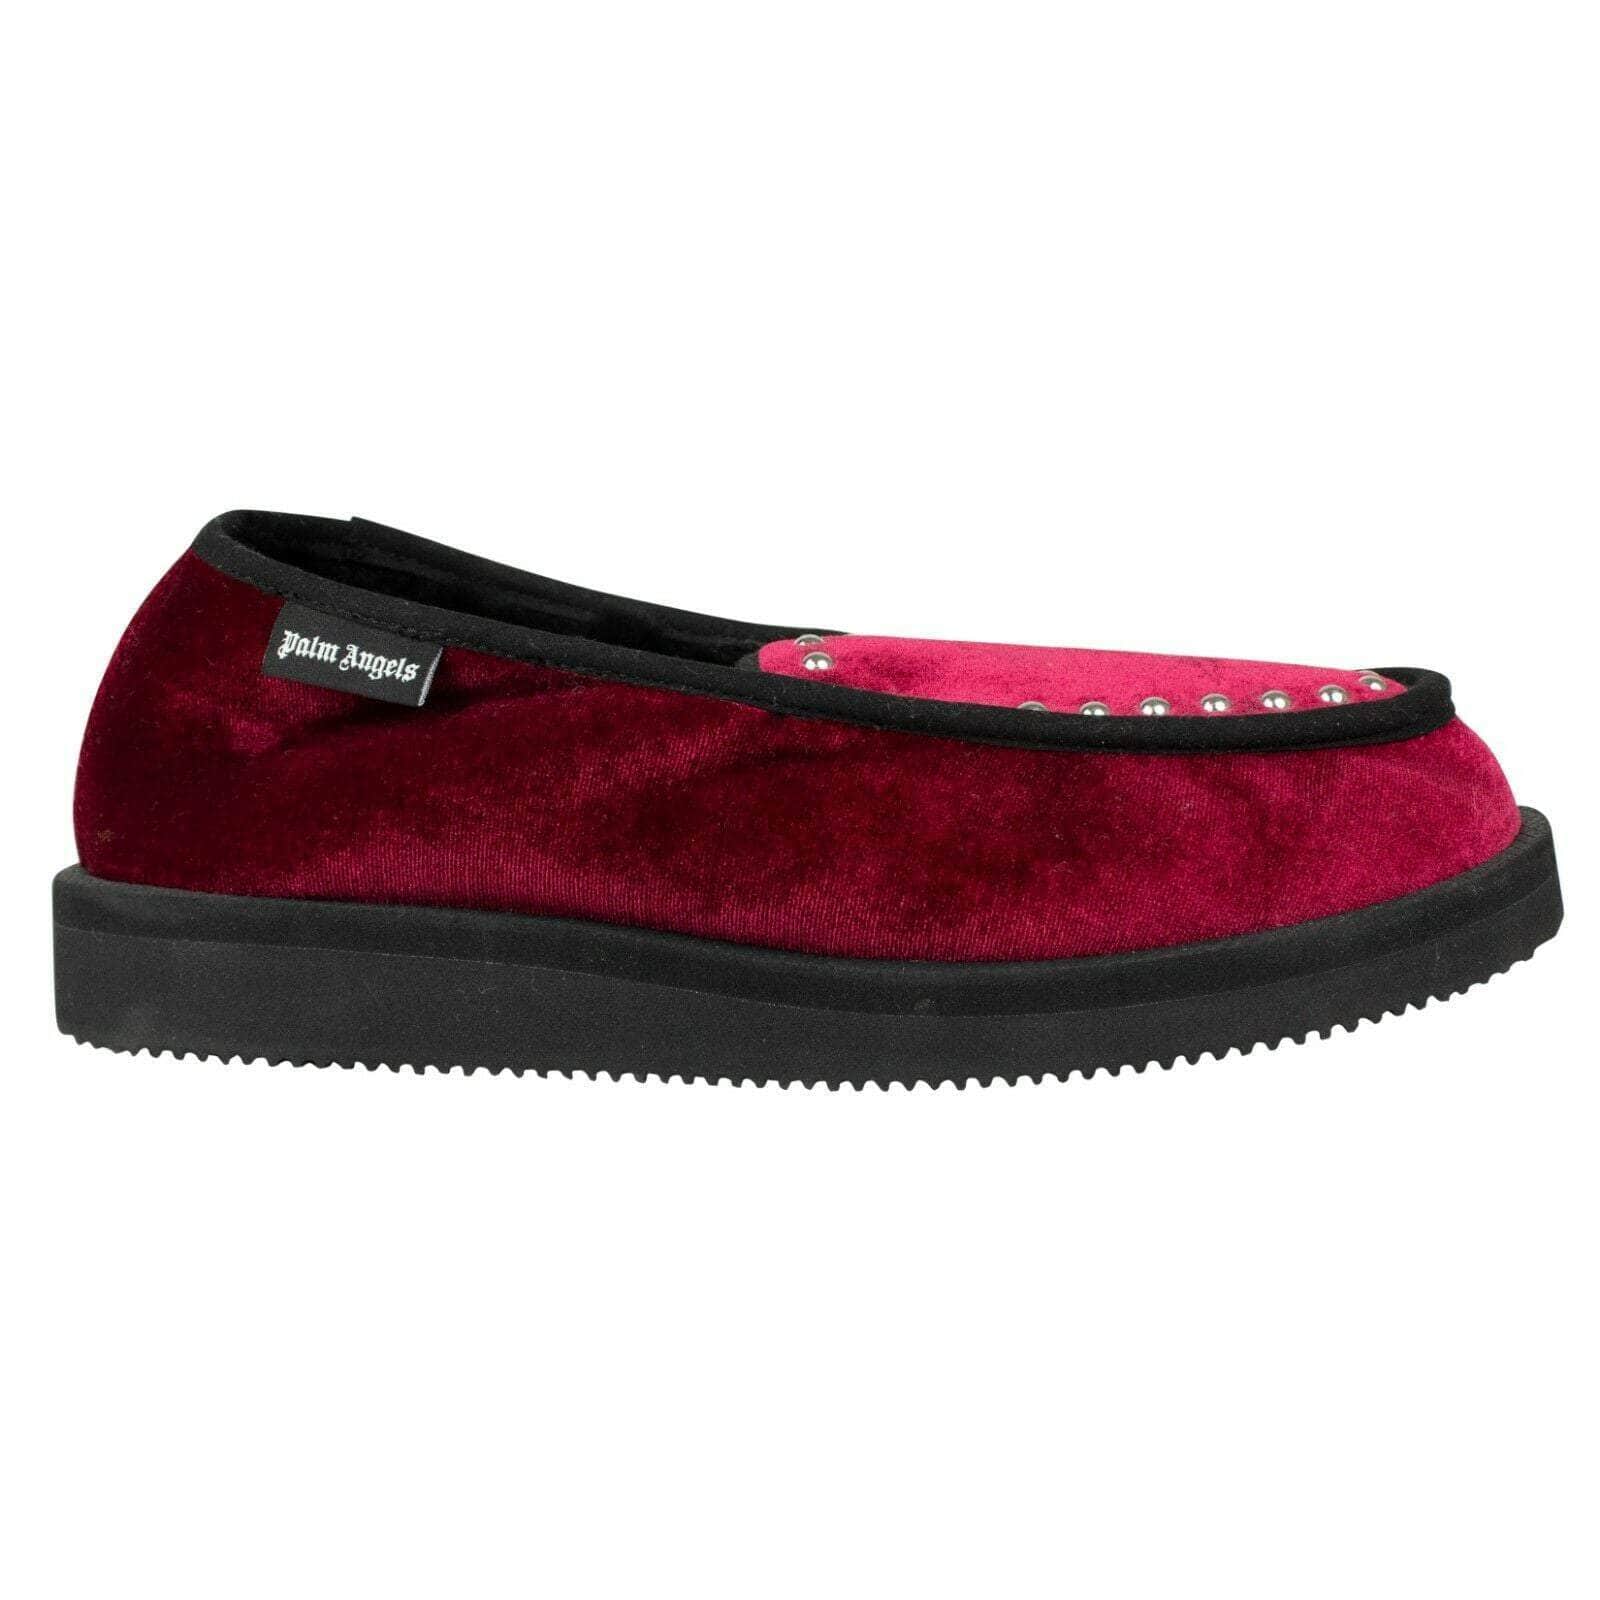 Palm Angels 327MSh, chicmi, couponcollection, gender-mens, main-shoes, mens-shoes, mens-slides-slippers, ow-pa, paaccessoriesshoes, palm-angels, size-8-us-41-eu, slippers, Streetwear, under-250 8 US / 41 EU Palm Angels x Suicoke Velvet Studded Slippers - Wine 65LE-2083/8 65LE-2083/8